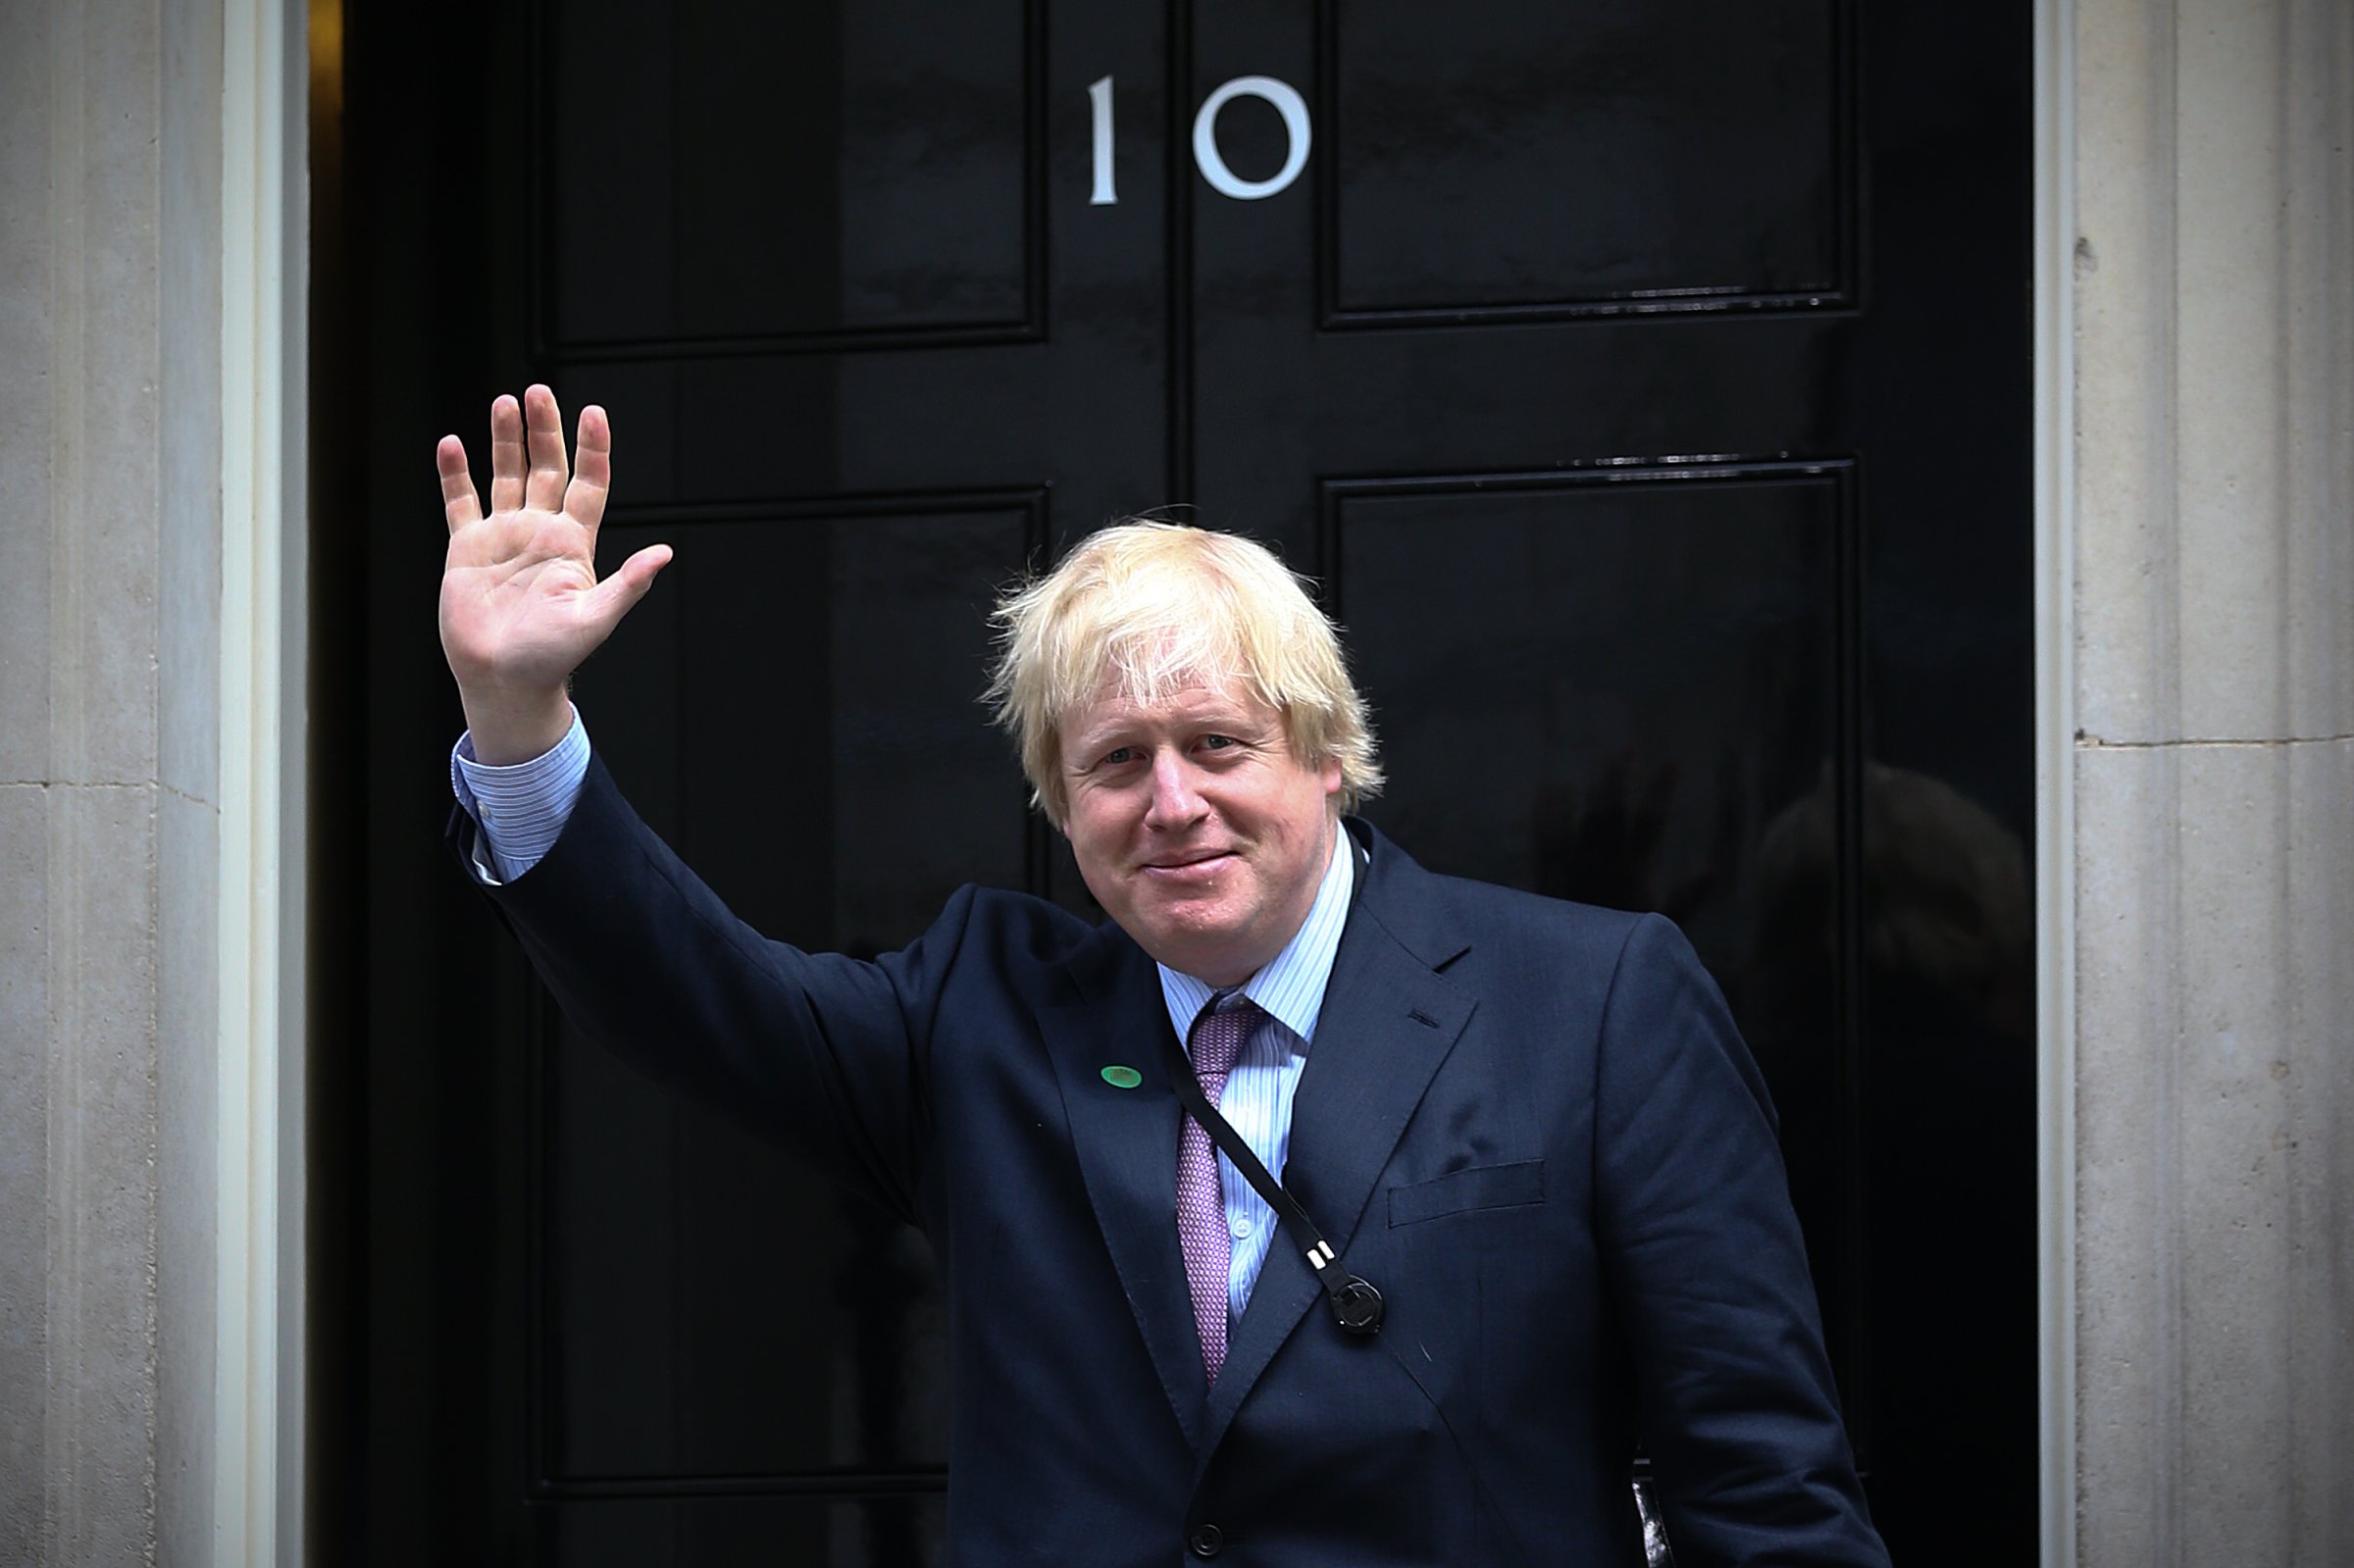 London Mayor and MP for Uxbridge and South Ruislip, Boris Johnson, arrives at Downing Street in London on May 11, 2015.